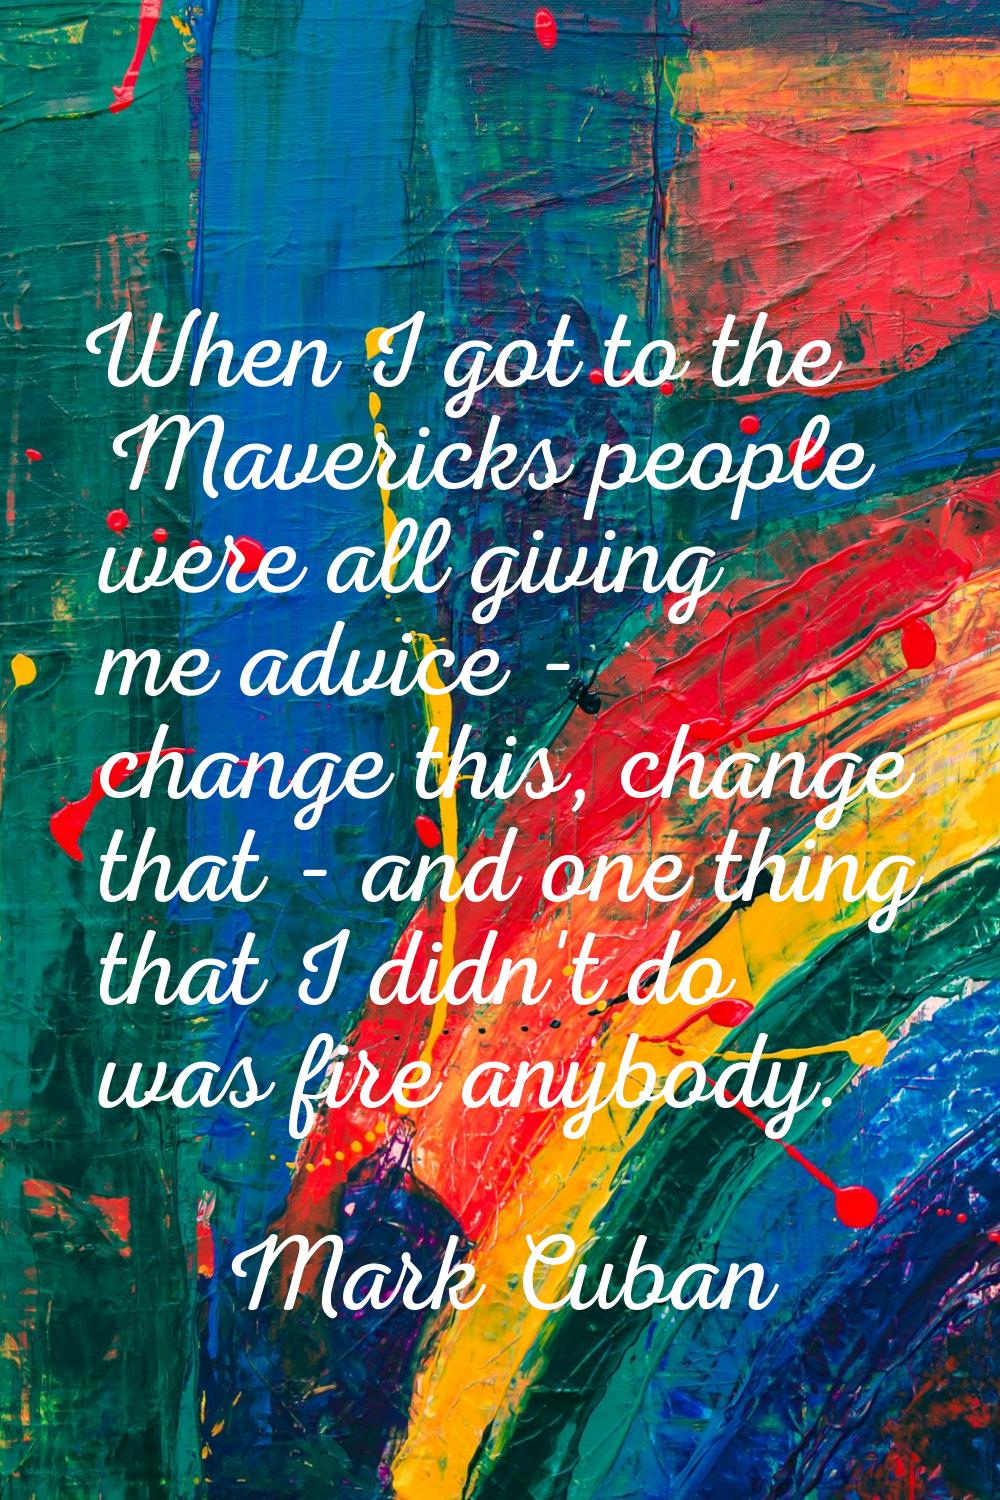 When I got to the Mavericks people were all giving me advice - change this, change that - and one t